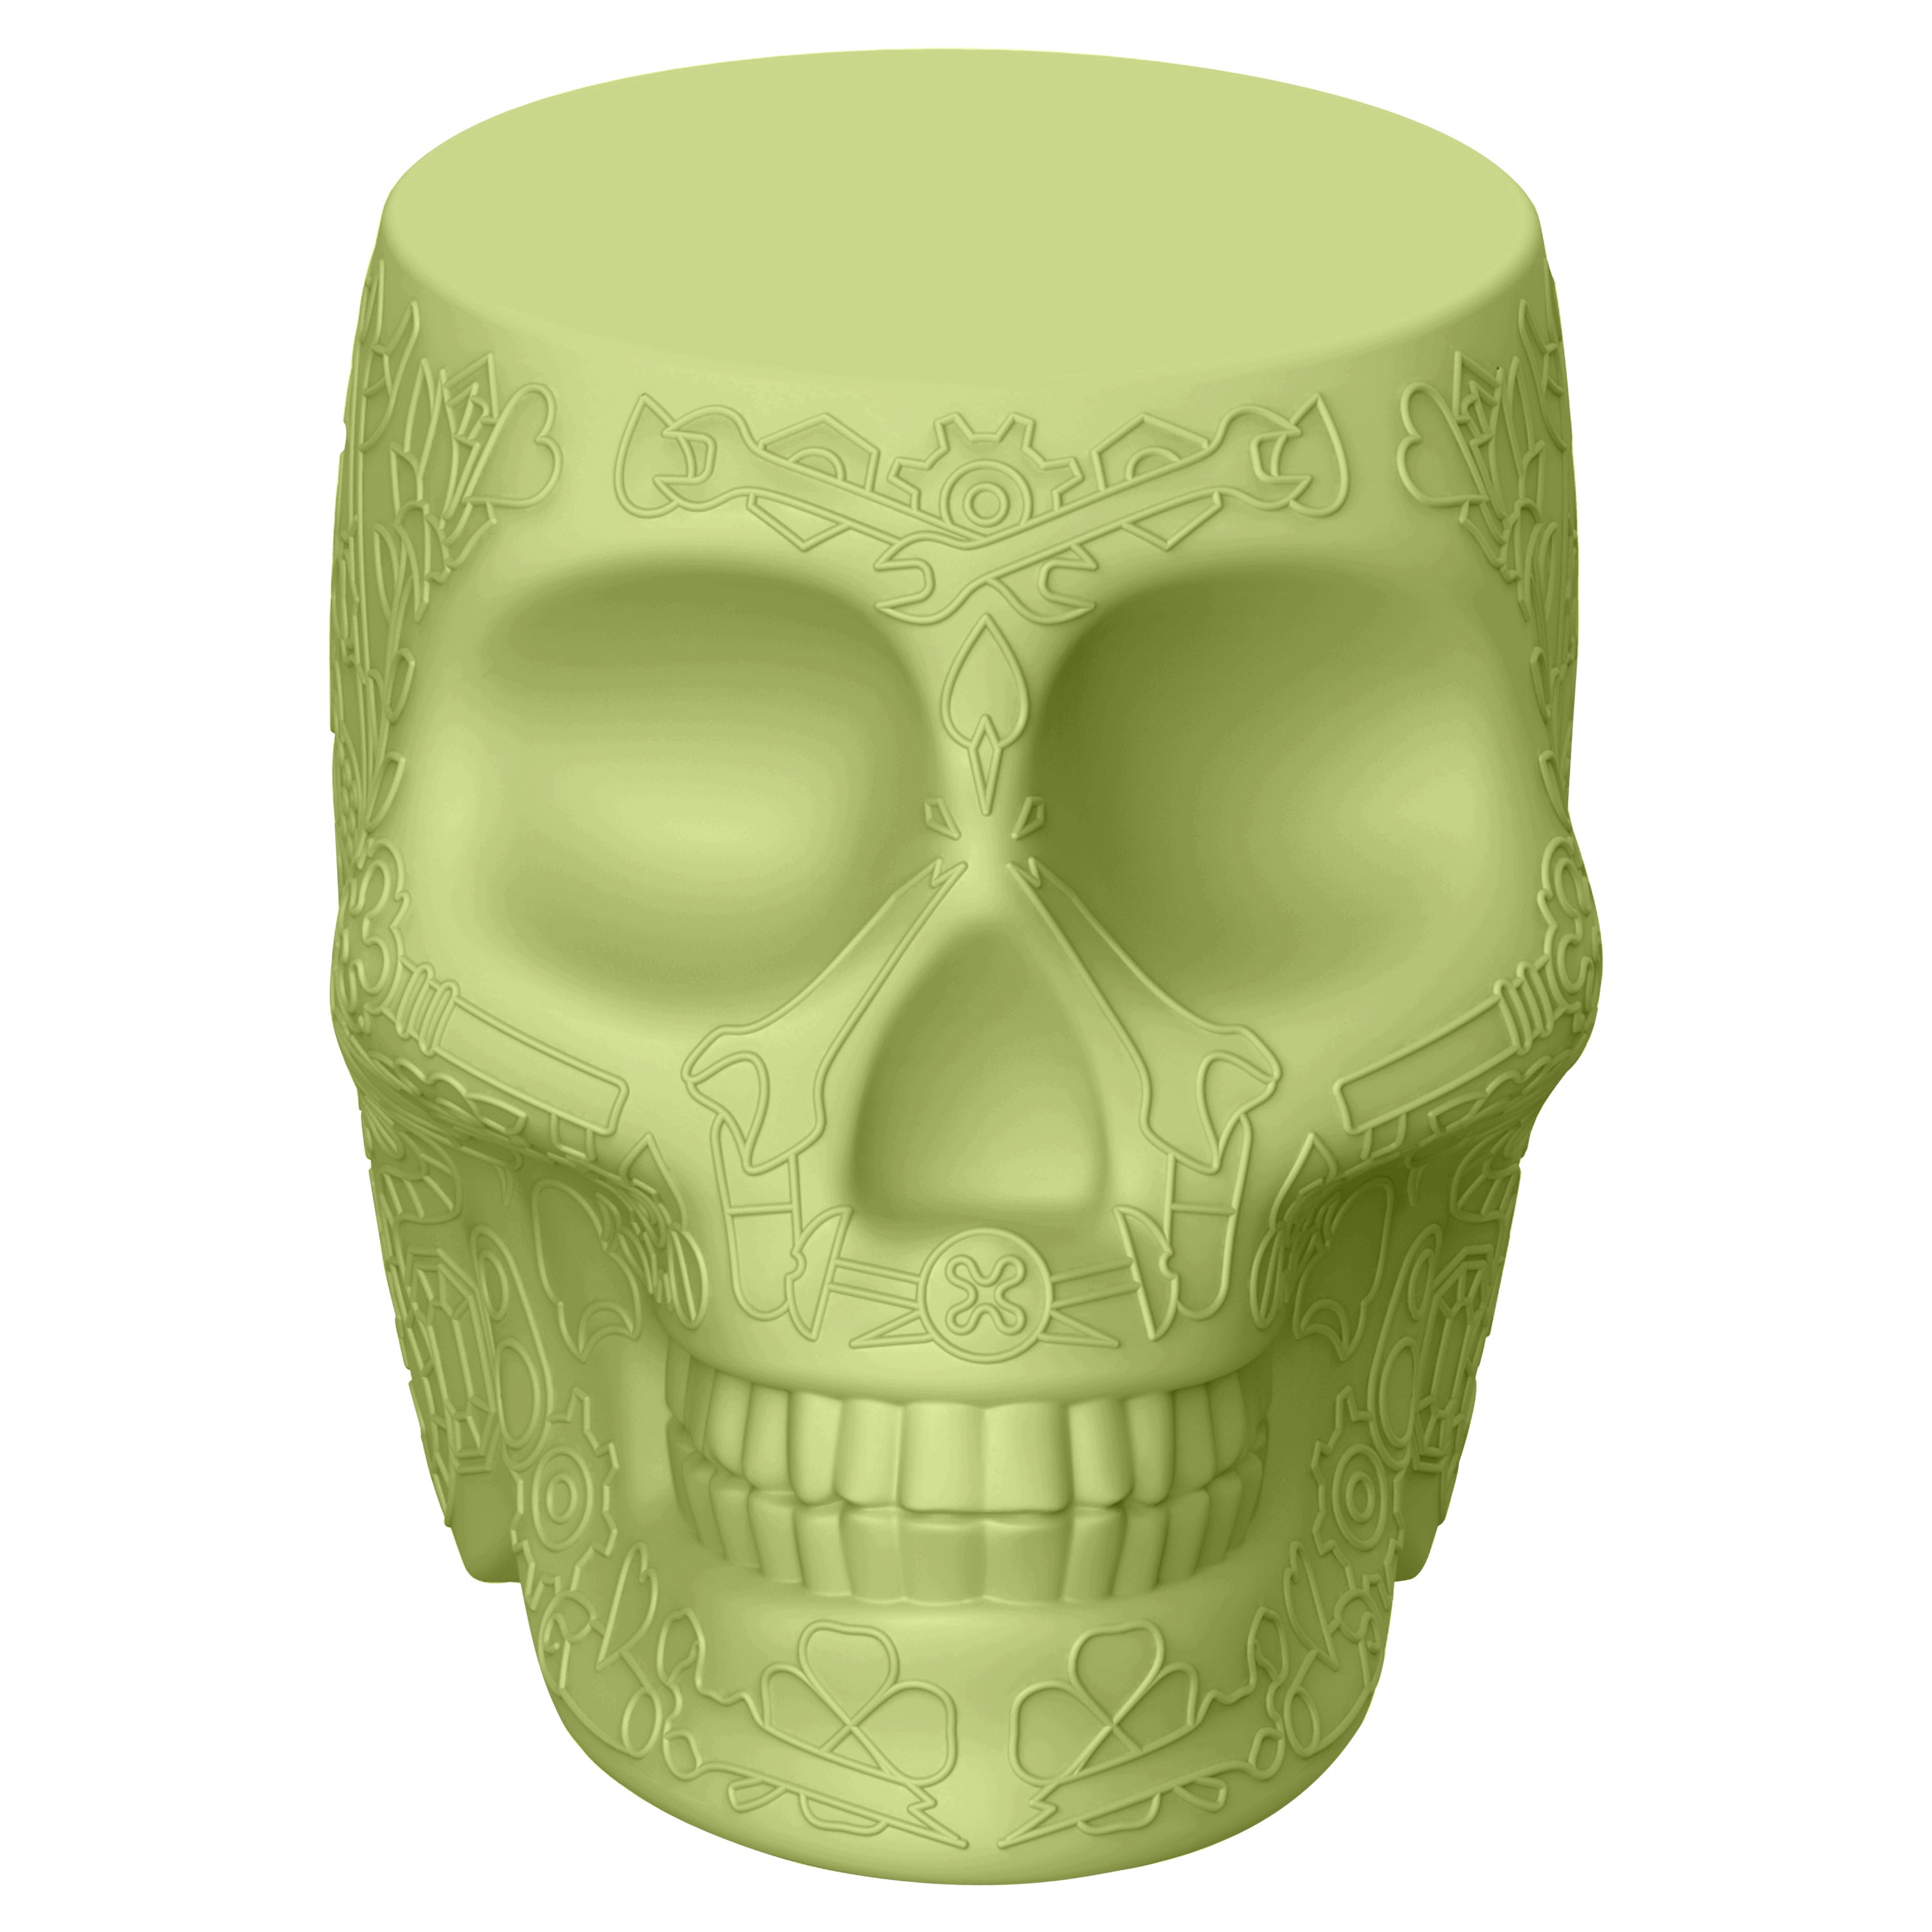 In Stock in Los Angeles, Green Mexico Skull Mini Portable Bank Charger For Sale